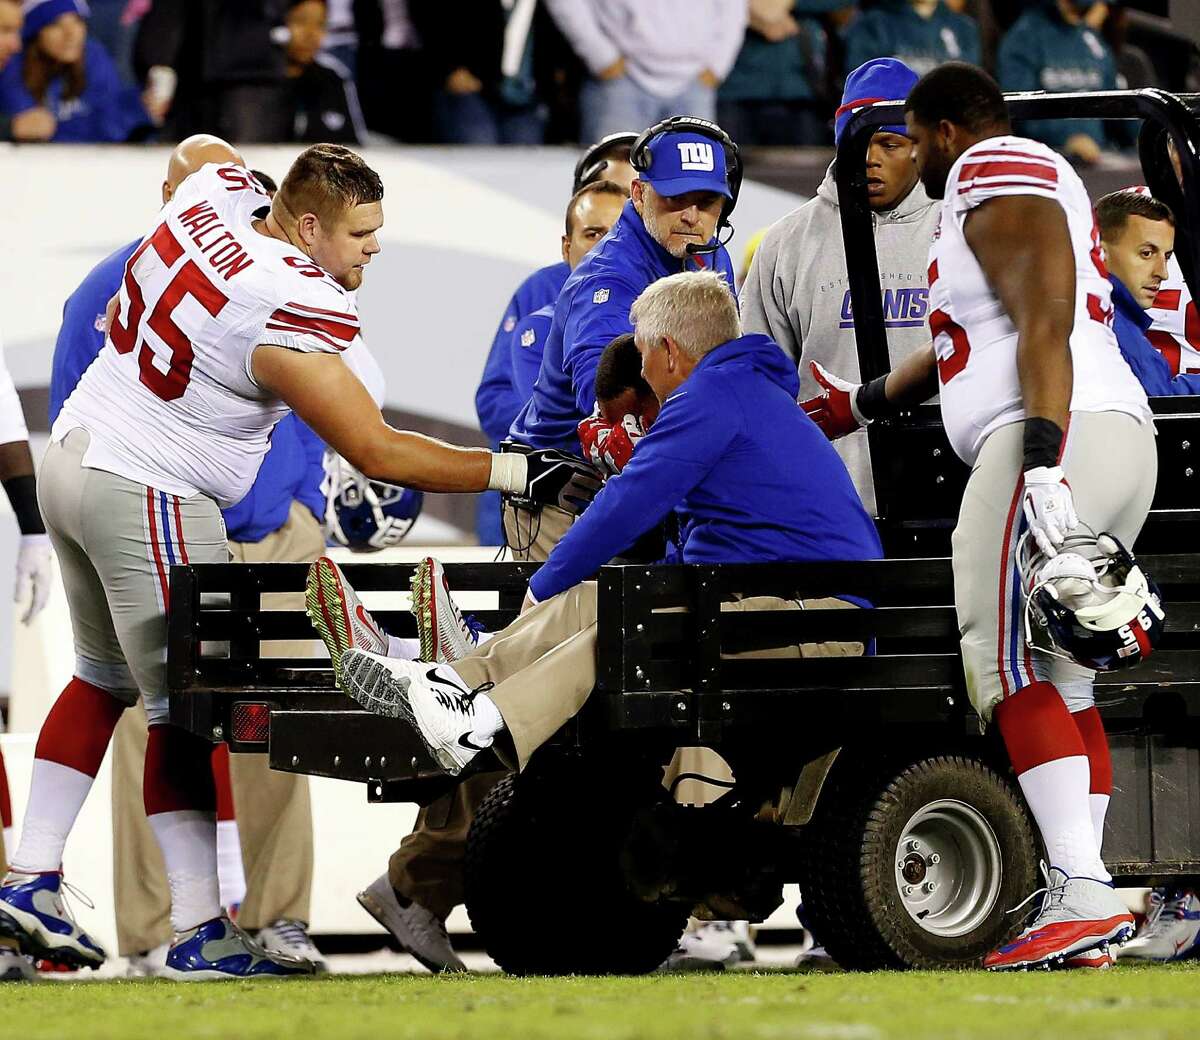 Other Giants must fill void after Cruz's injury